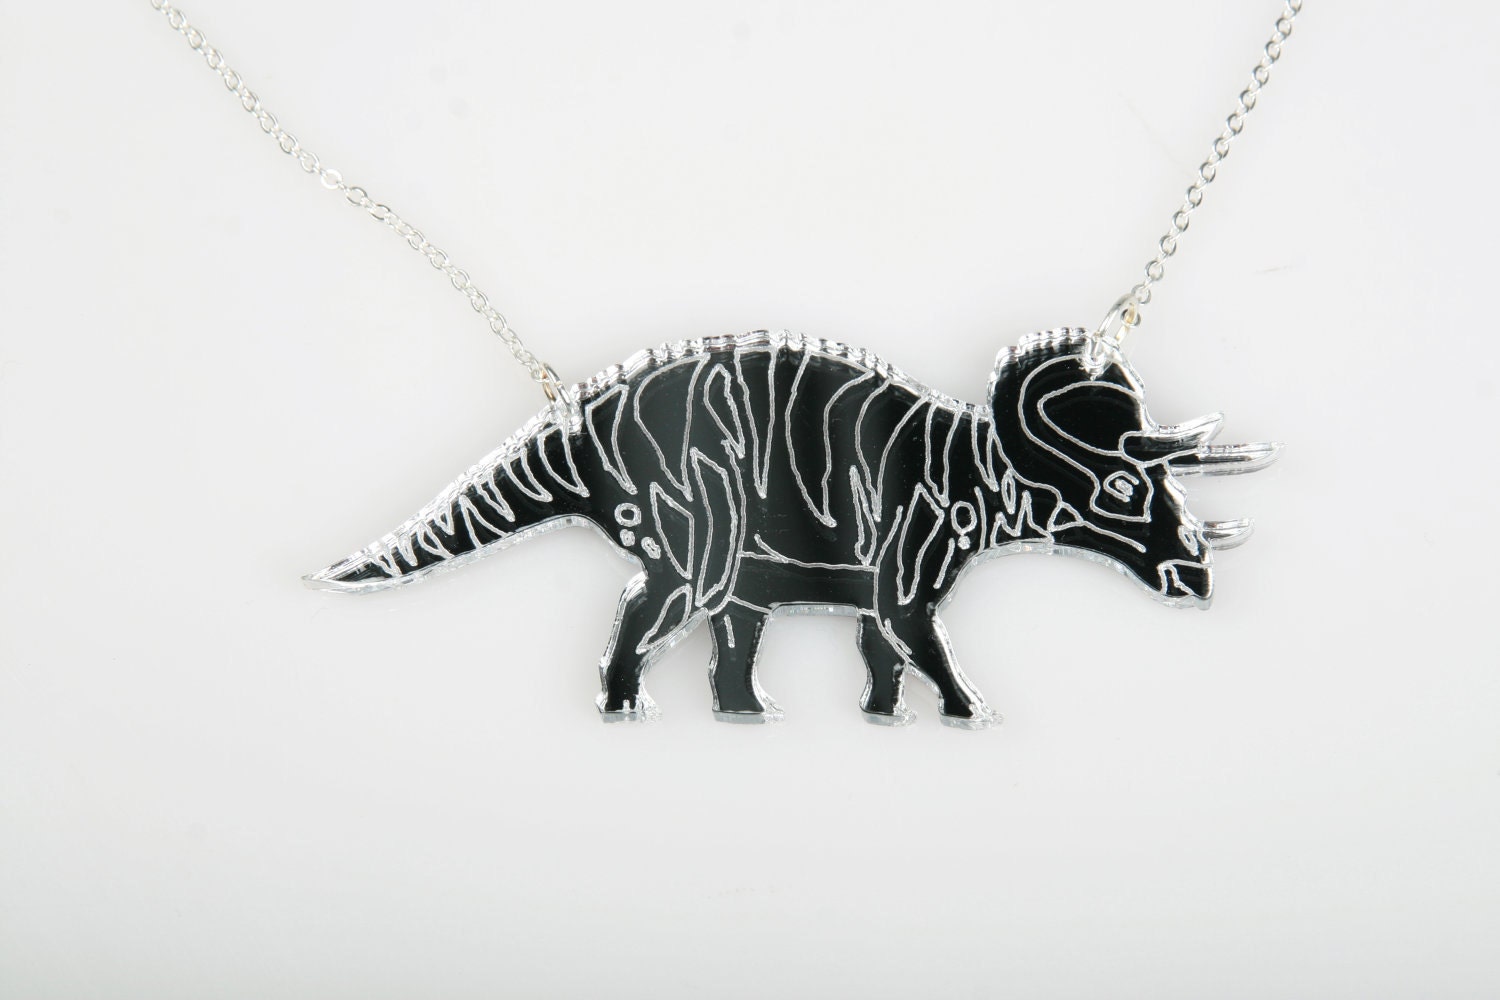 Triceratops Necklace. Laser Cut Acrylic Dinosaur Necklace. Mirrored Perspex and Cherry Wood.